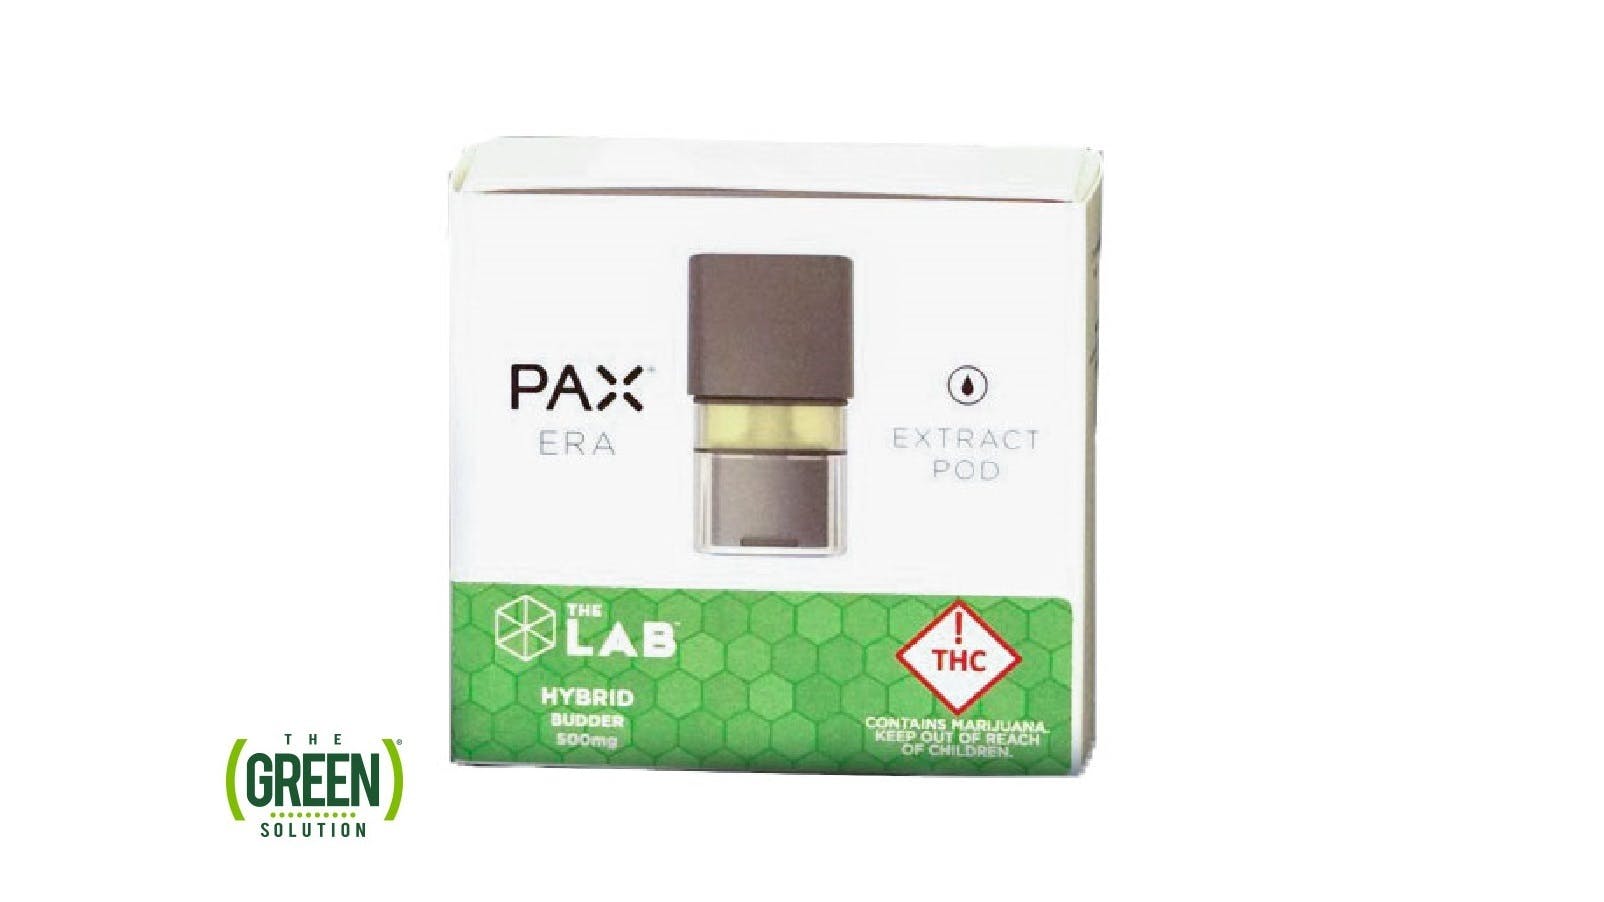 concentrate-pax-era-the-lab-budder-pod